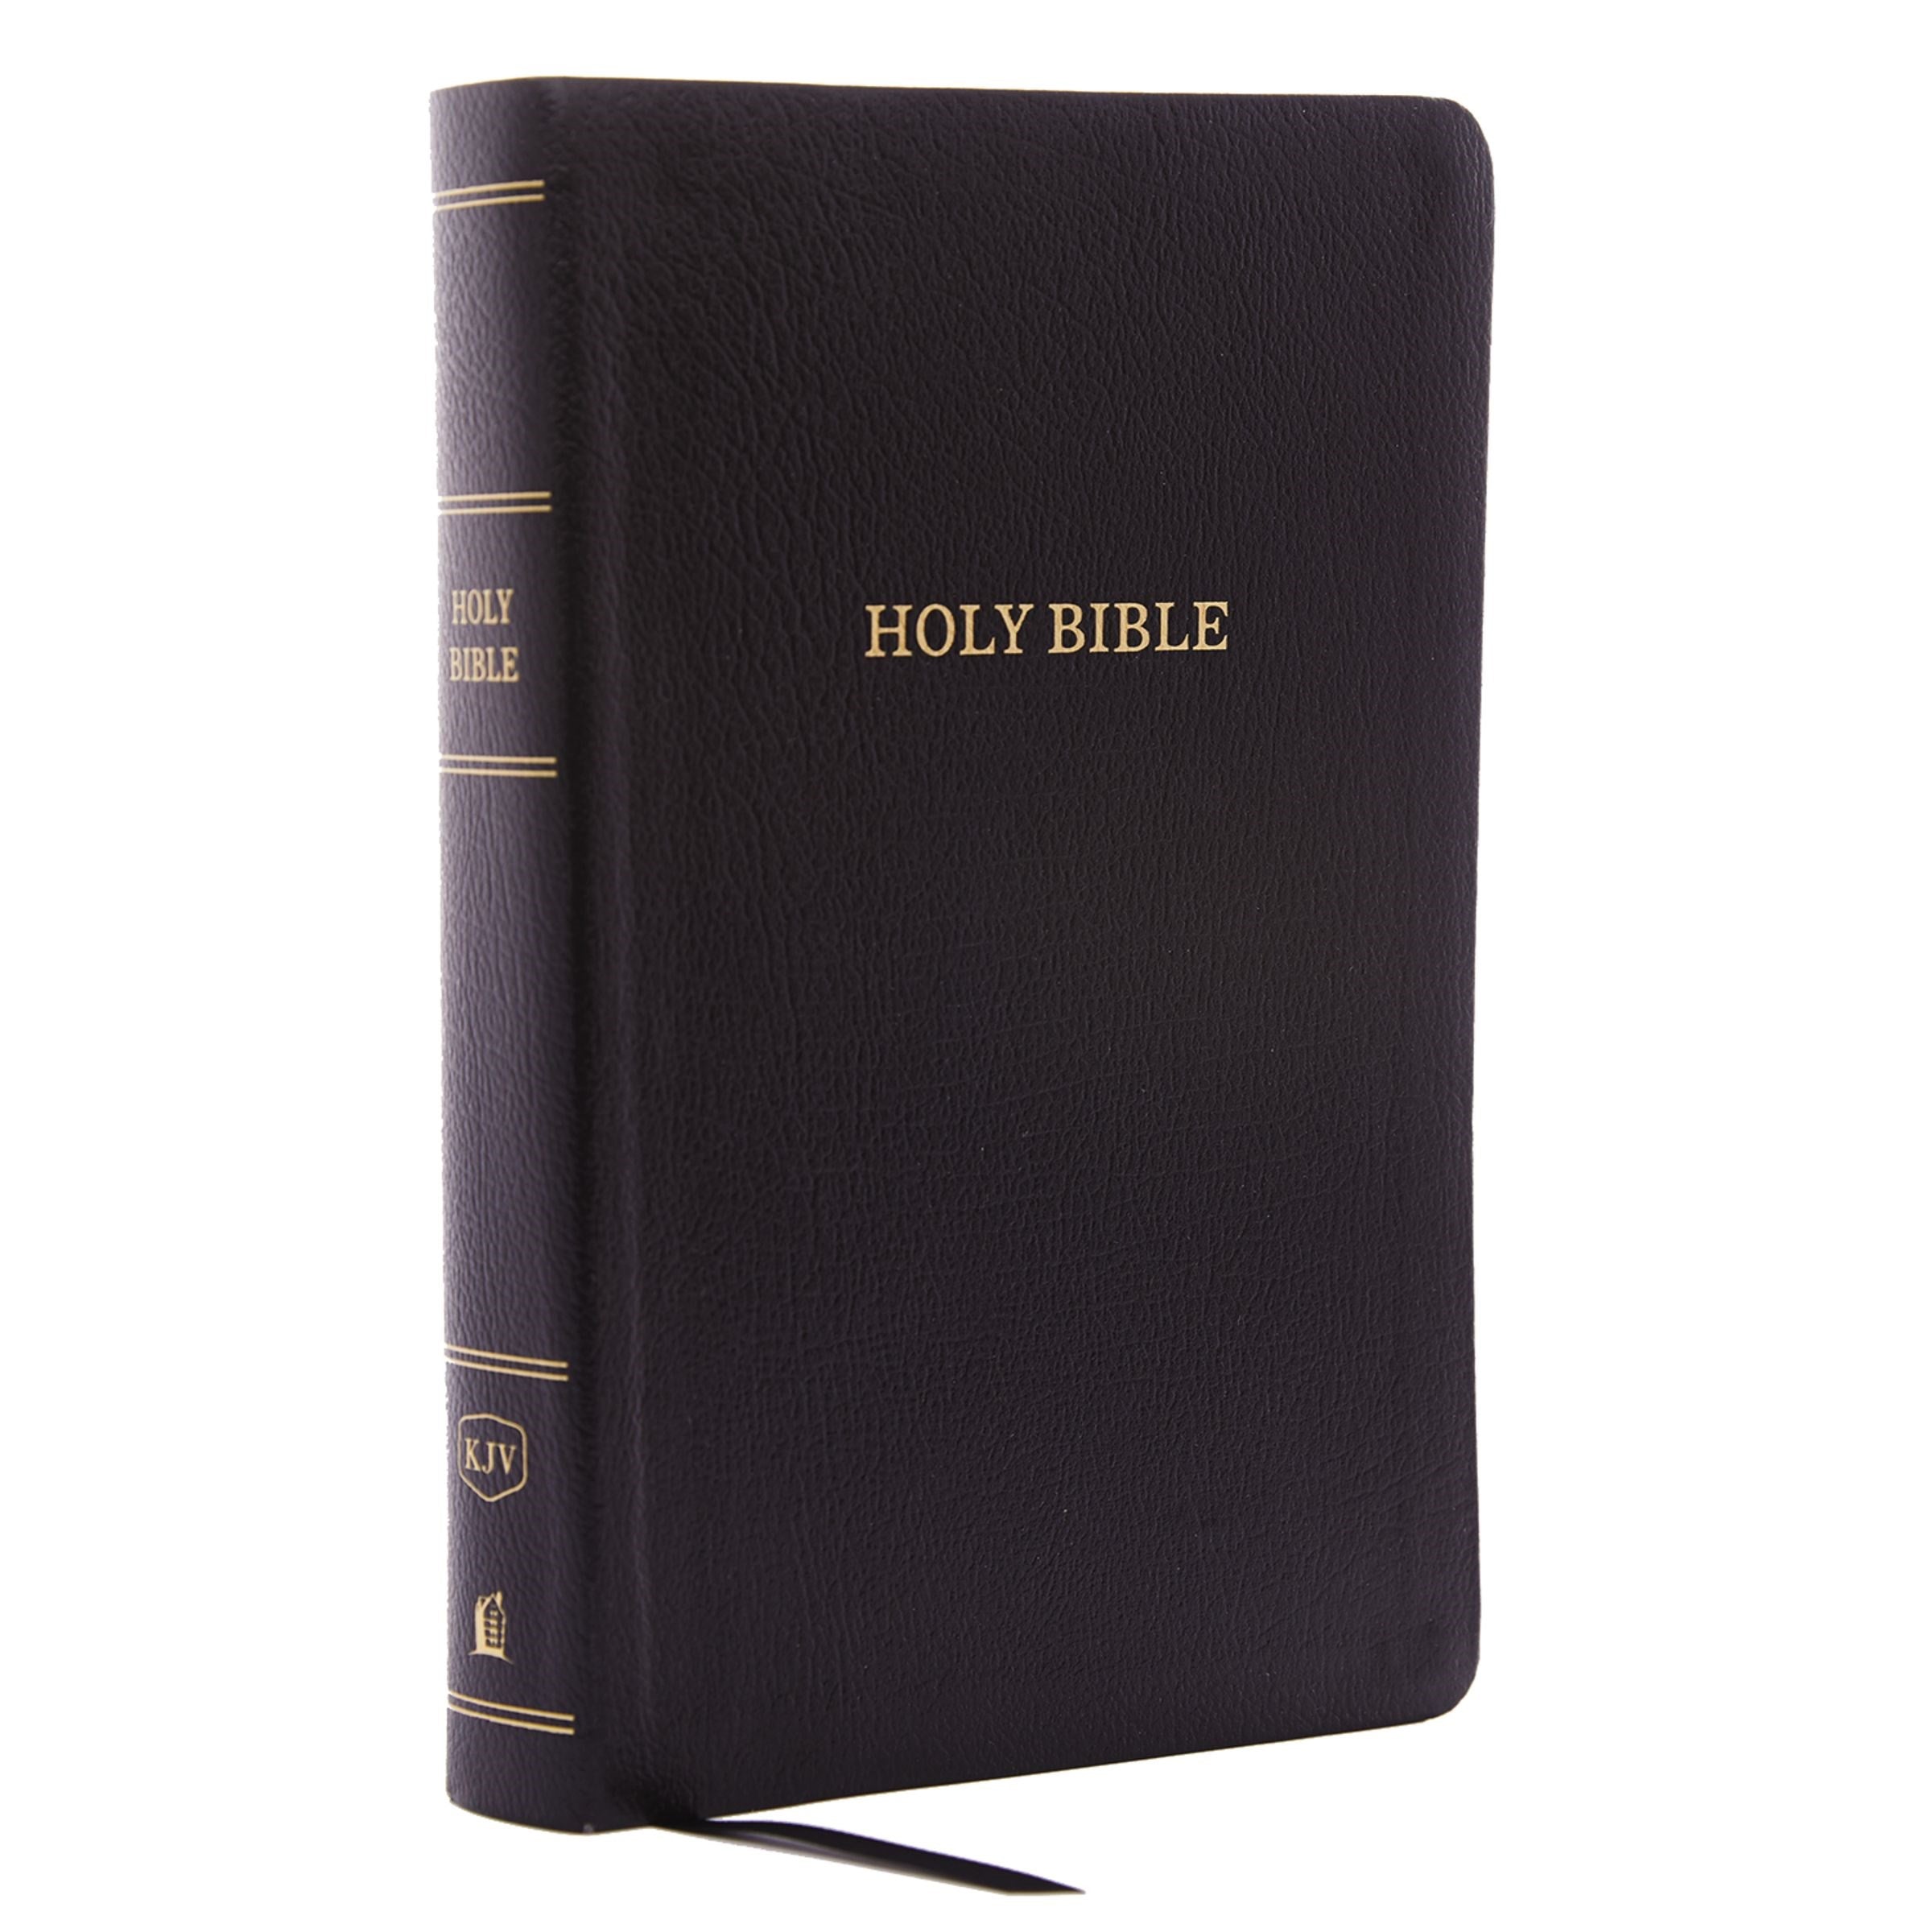 KJV Holy Bible, Personal Size Giant Print Reference Bible, Black Bonded Leather, Thumb Indexed, 43,000 Cross References, Red Letter, Comfort Print: King James Version : King James Version